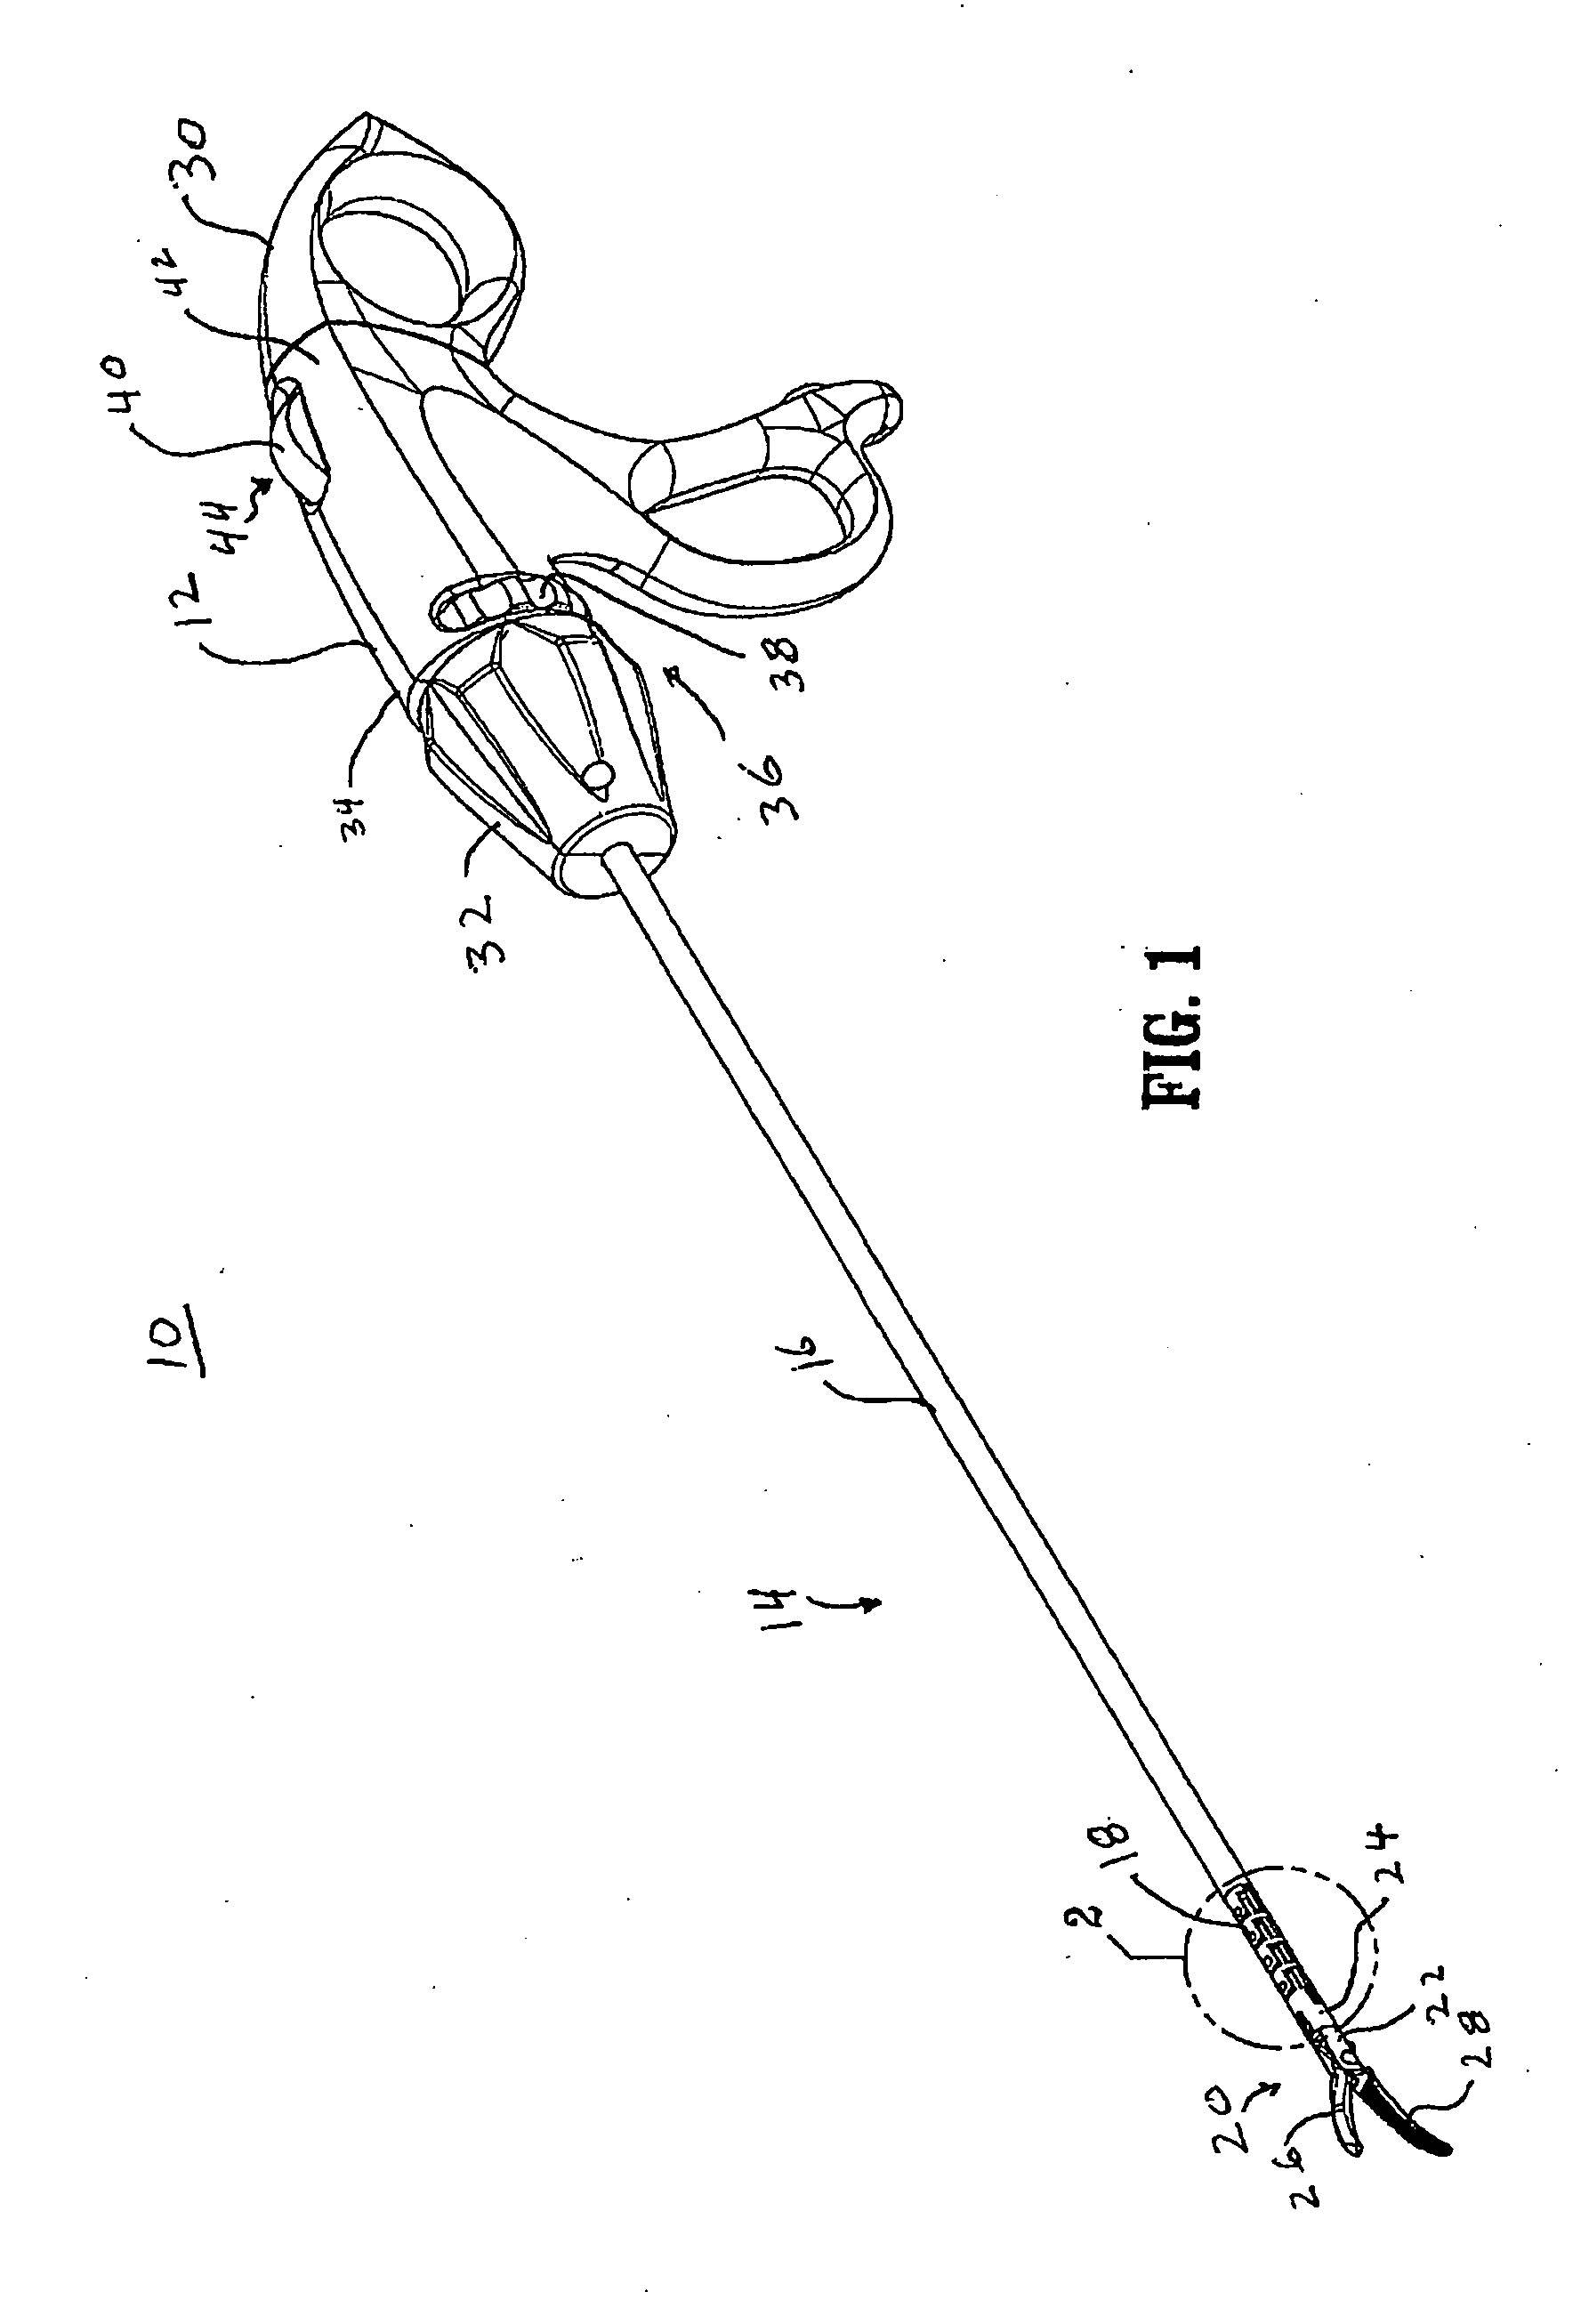 Articulating Surgical Instrument